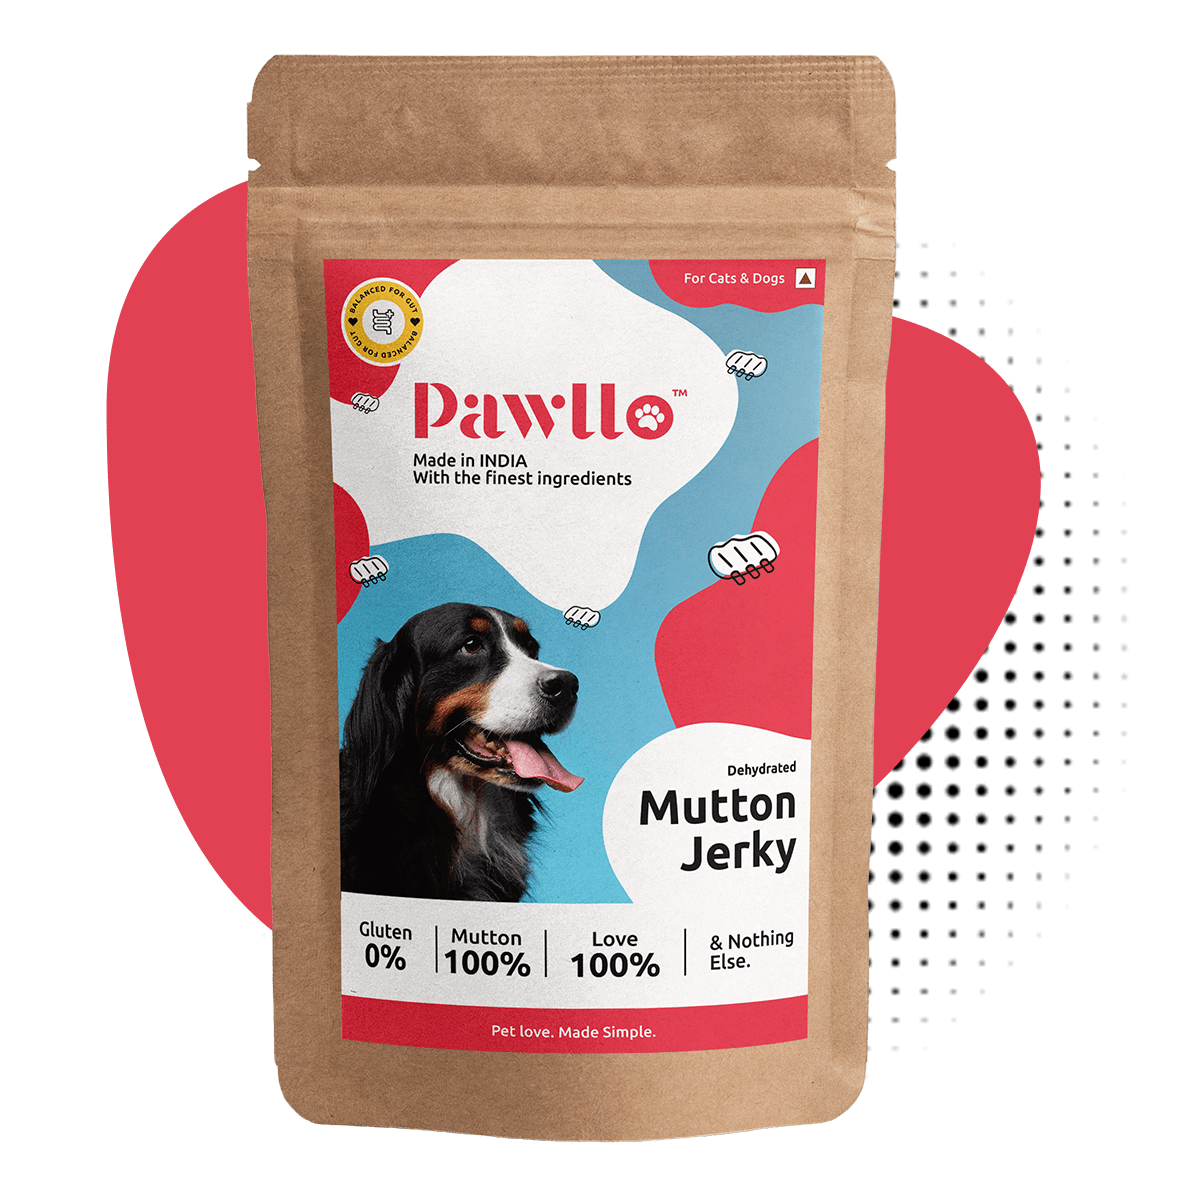 Mutton Jerky - Boneless Dehydrated Natural Protein Loaded Snack for Cats and Dogs - 100% Mutton